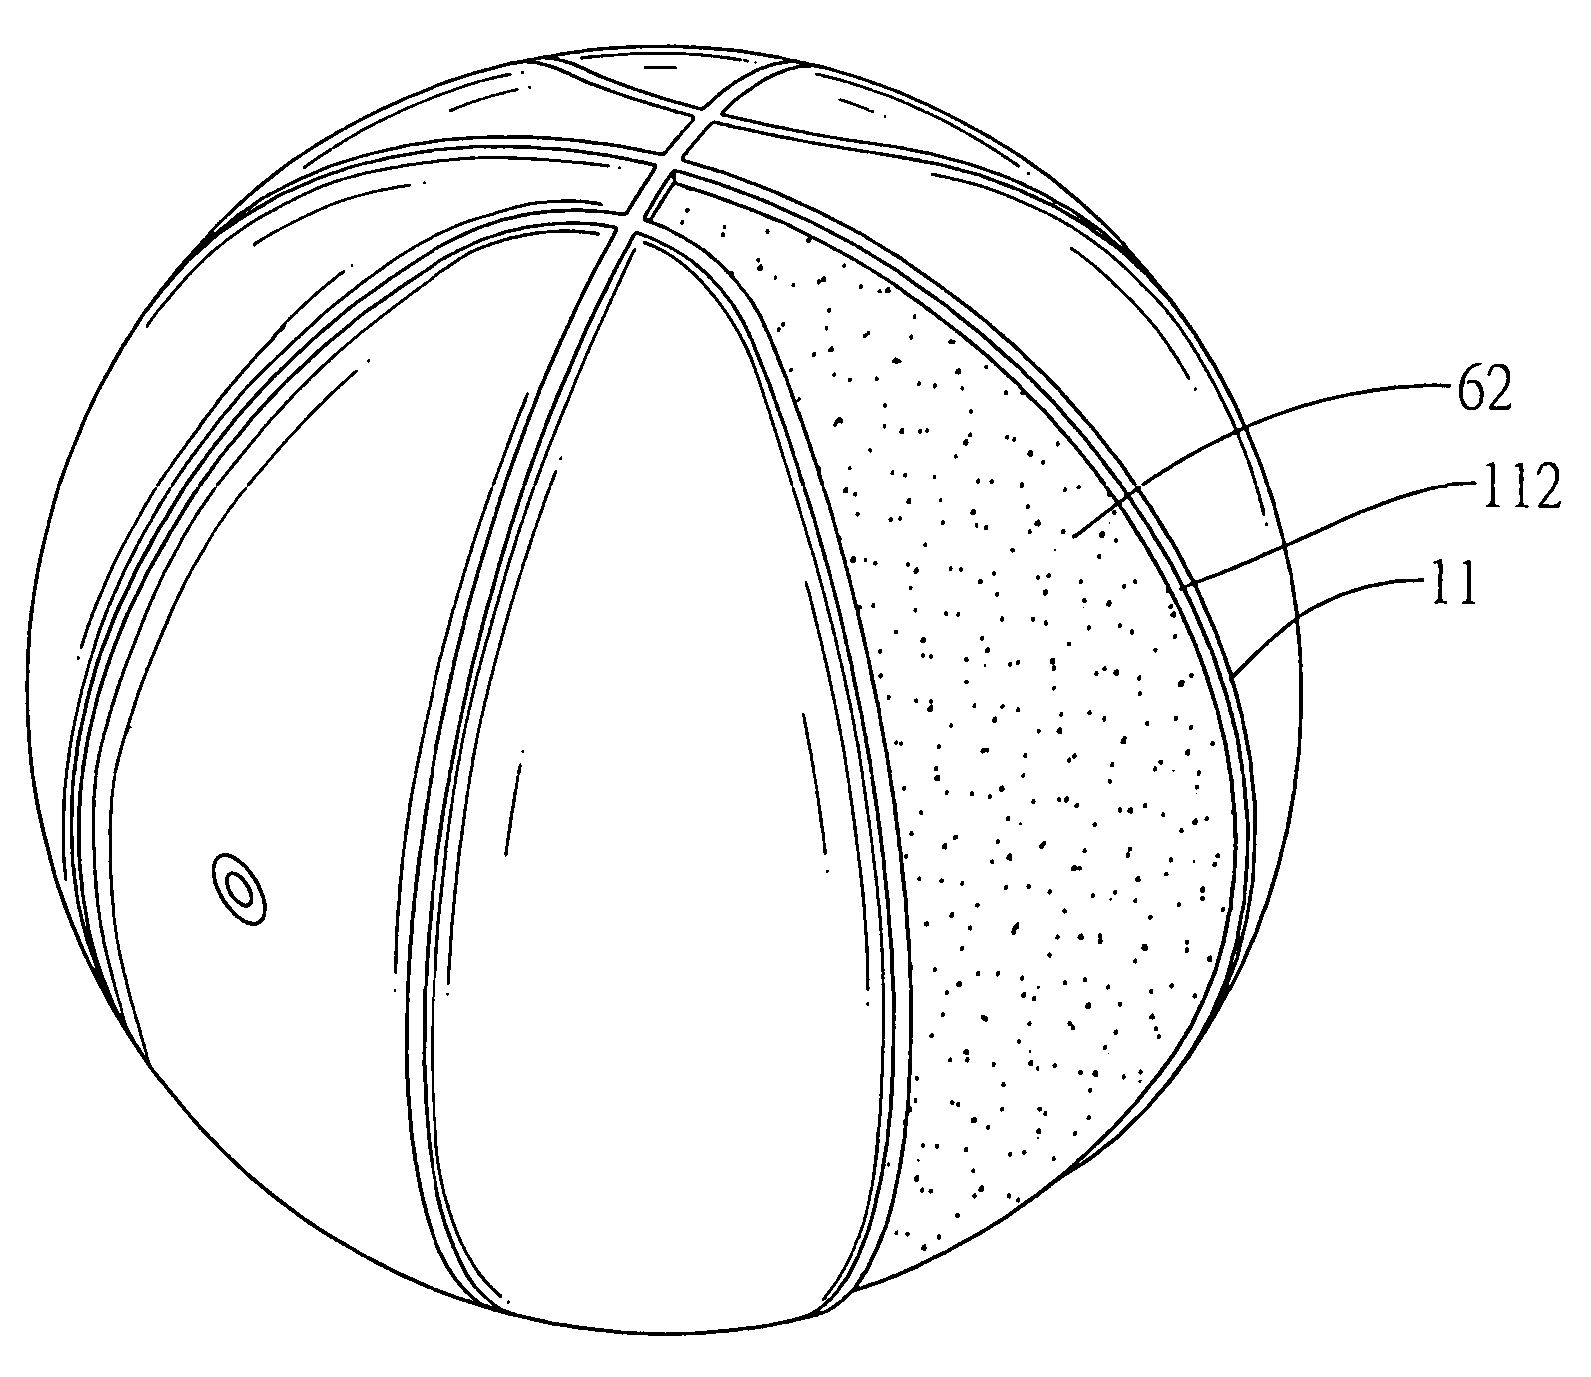 Ball with an improved bladder carcass securely engaging with multiple cover panels